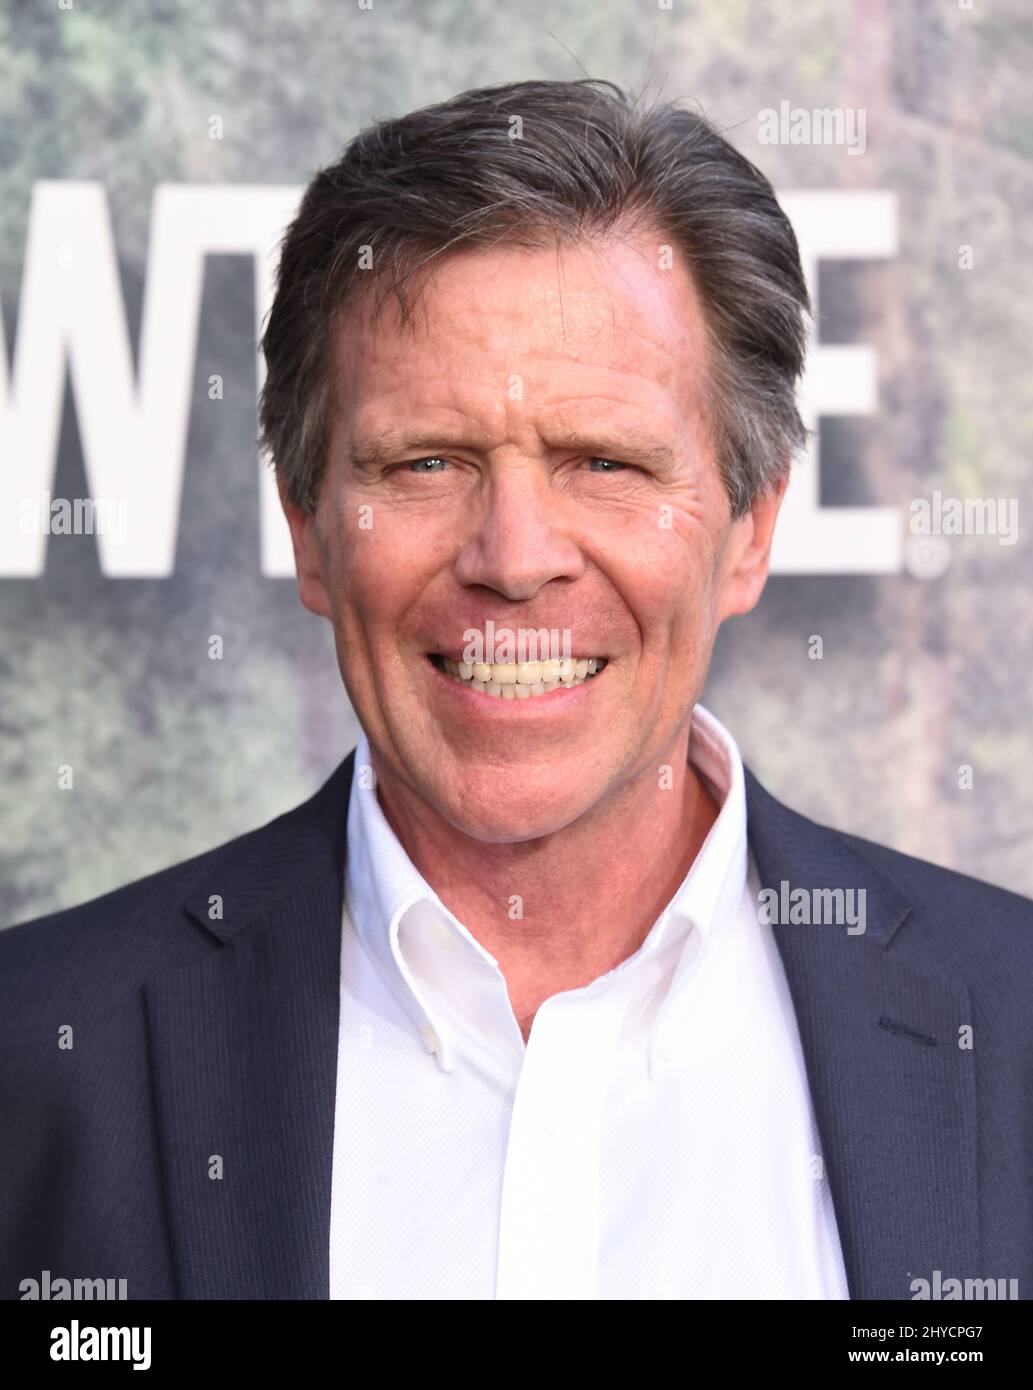 Grant Goodeve arriving to Showtime's Limited Series 'Twin Peaks' World Premiere held at the Ace Hotel in Los Angeles, USA Stock Photo